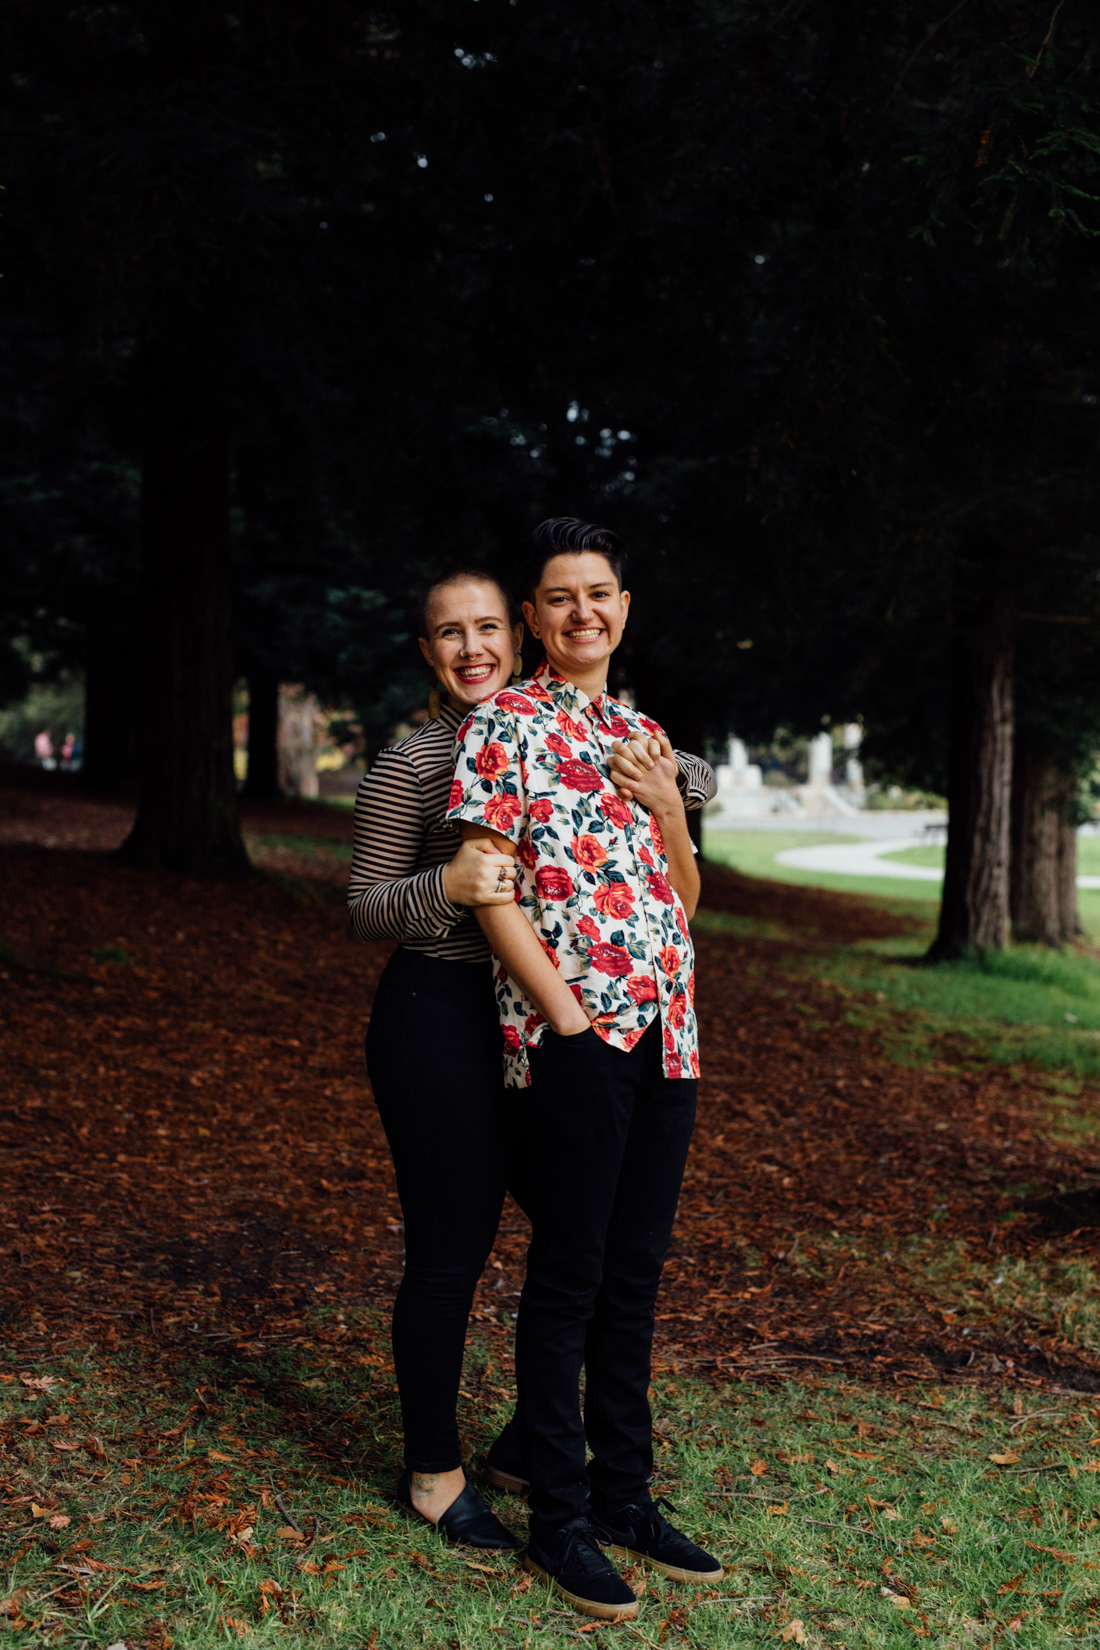 This couple celebrated a year living together in Oakland, California striped shirt floral shirt